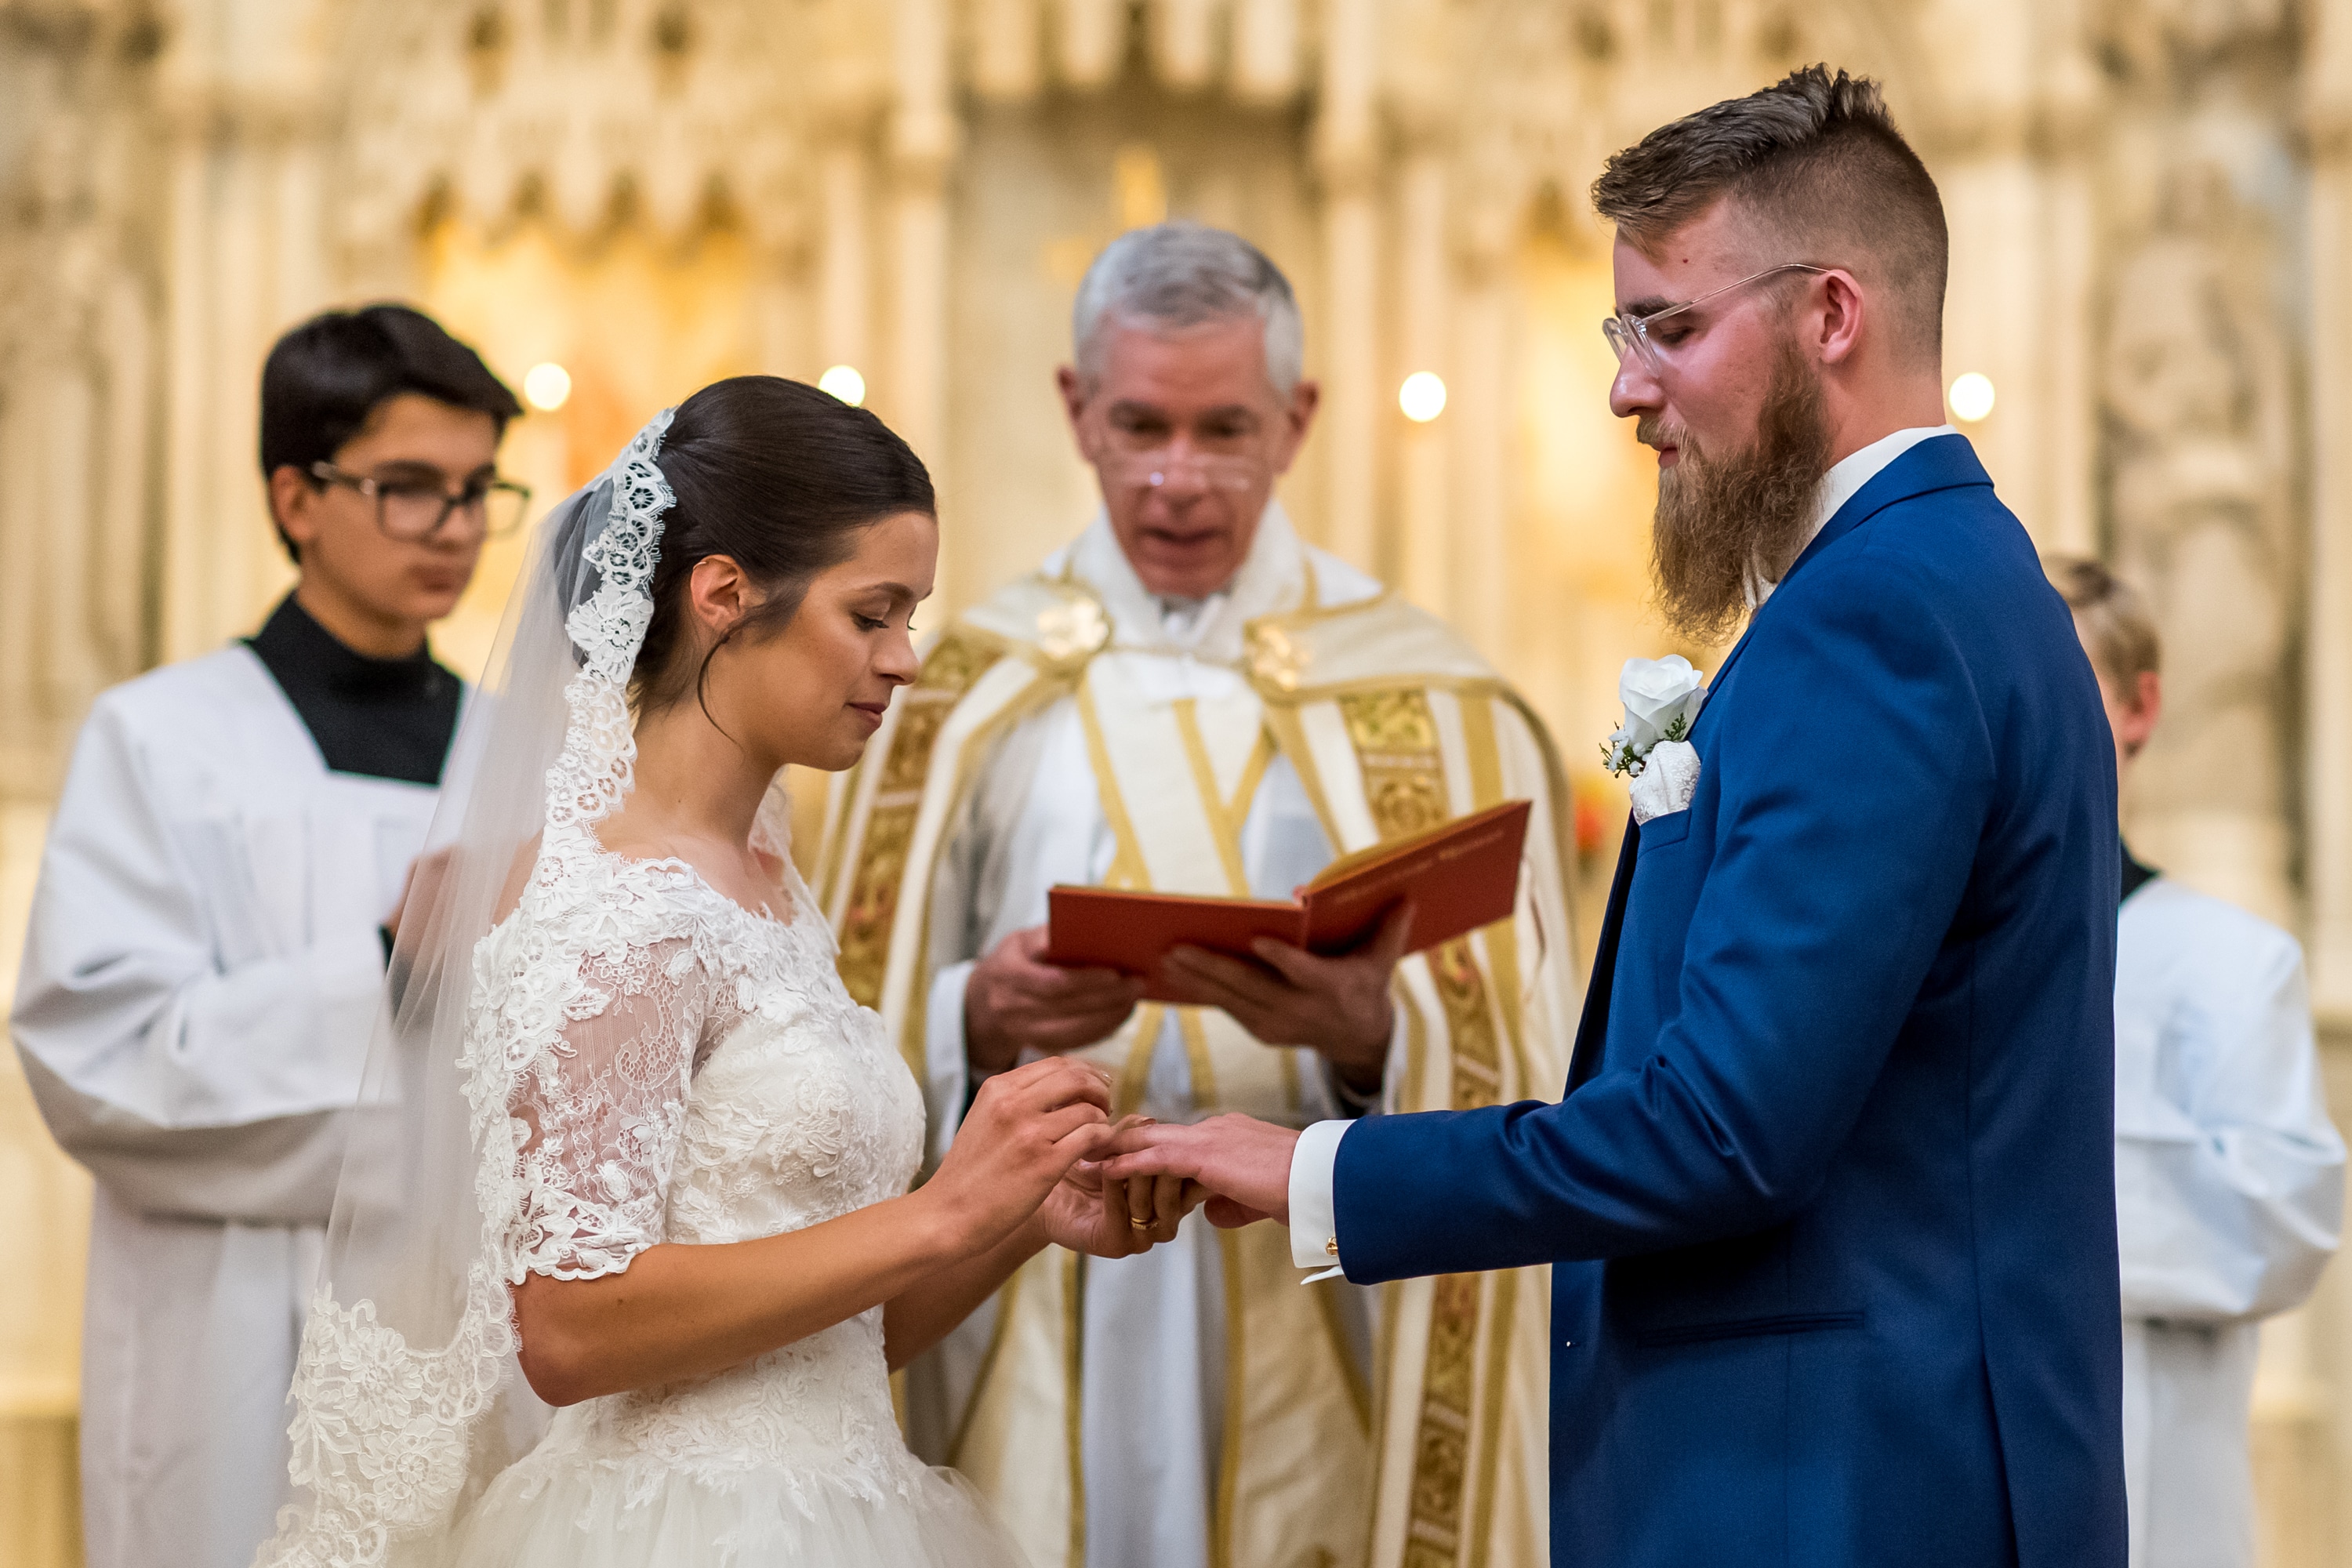 Bride puts on the ring of the groom at Our Lady of Mt. Carmel in Littleton, Colorado.